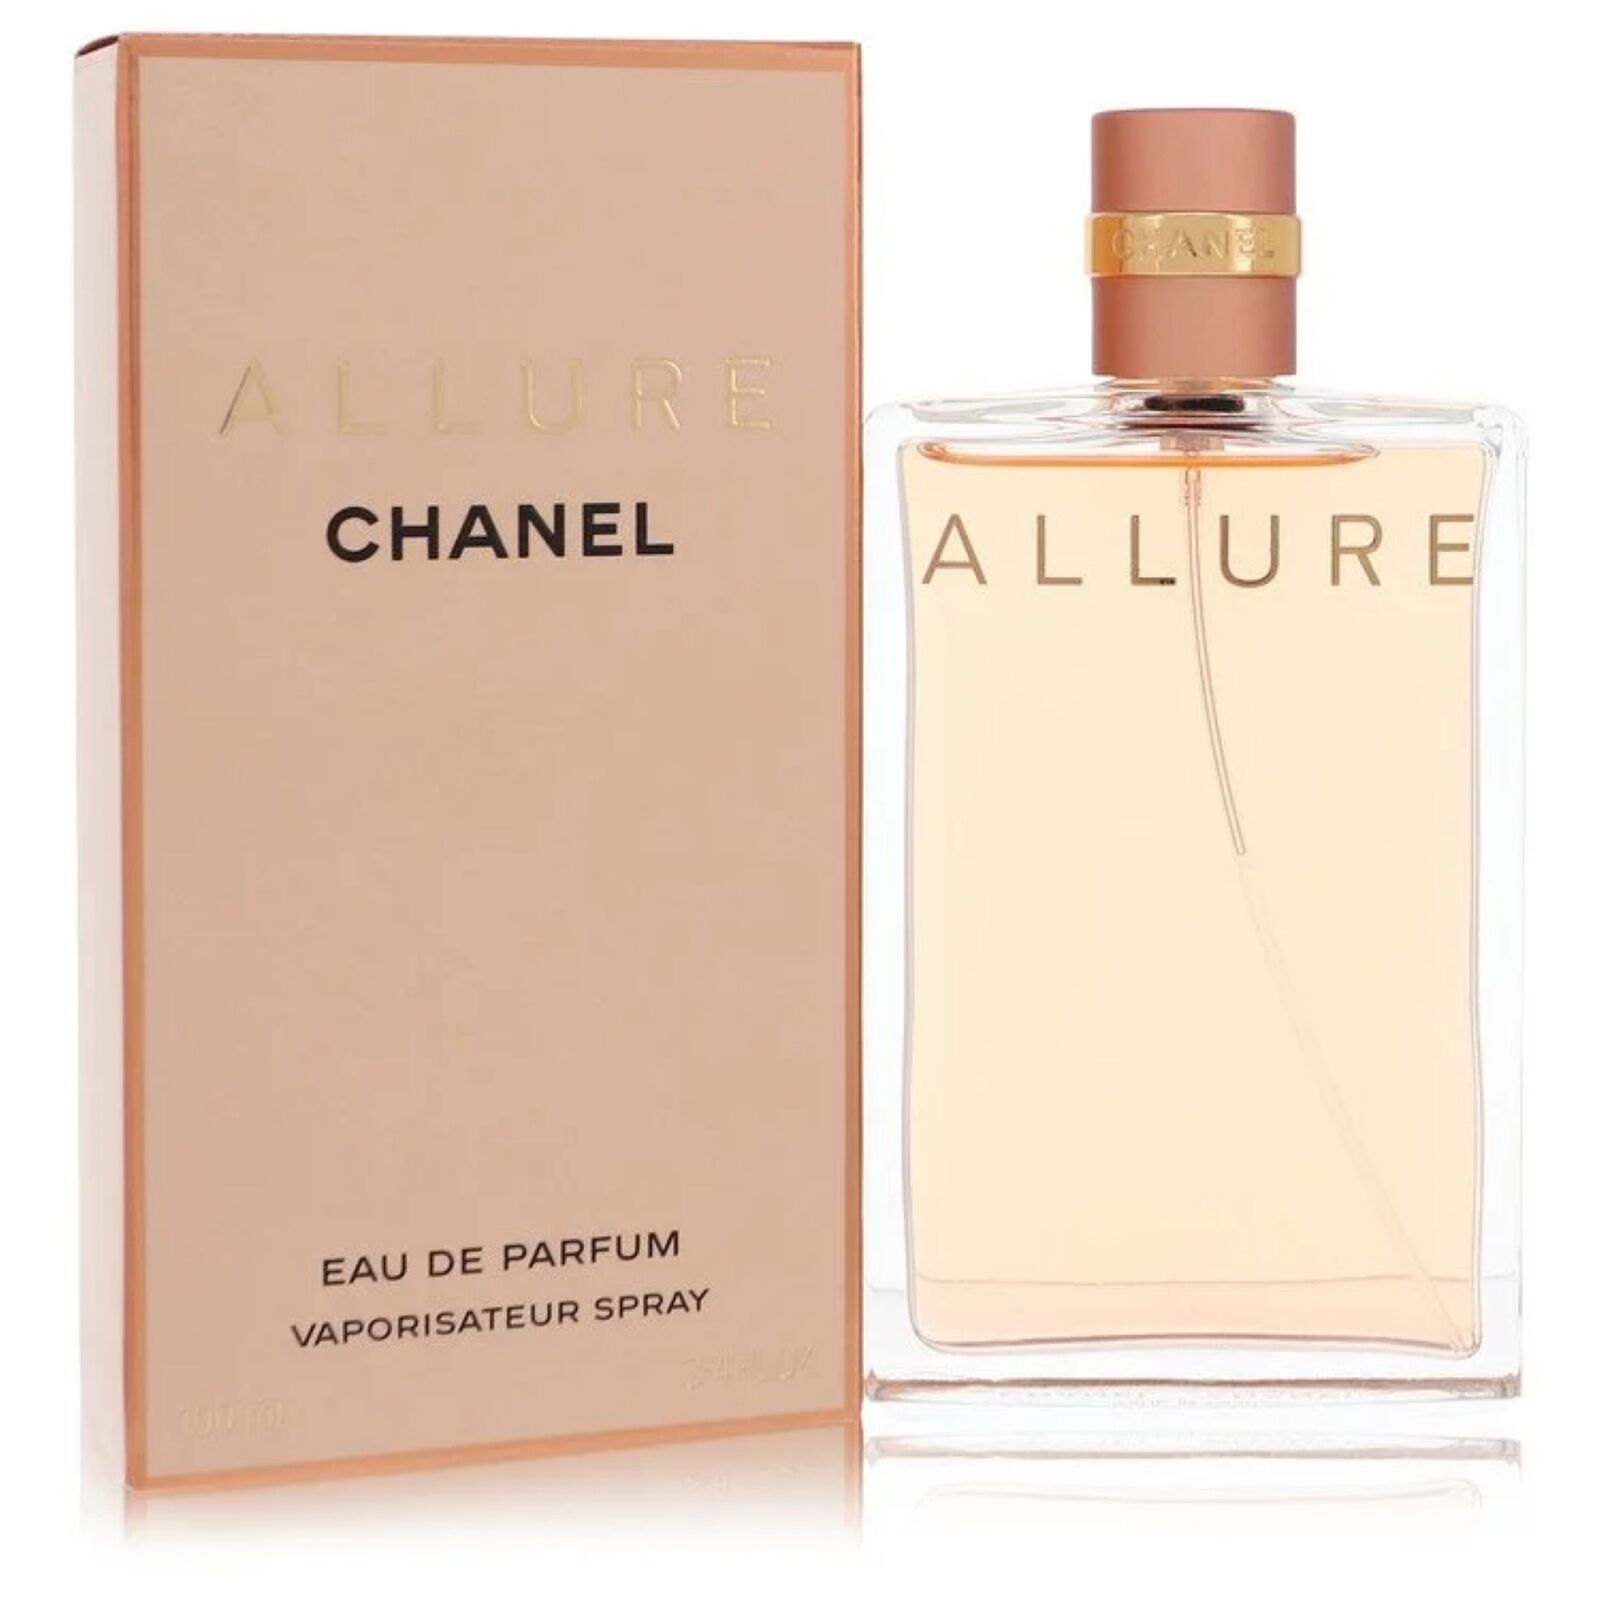 Allure EDP Spray Perfume 100 ml for Women by Chanel